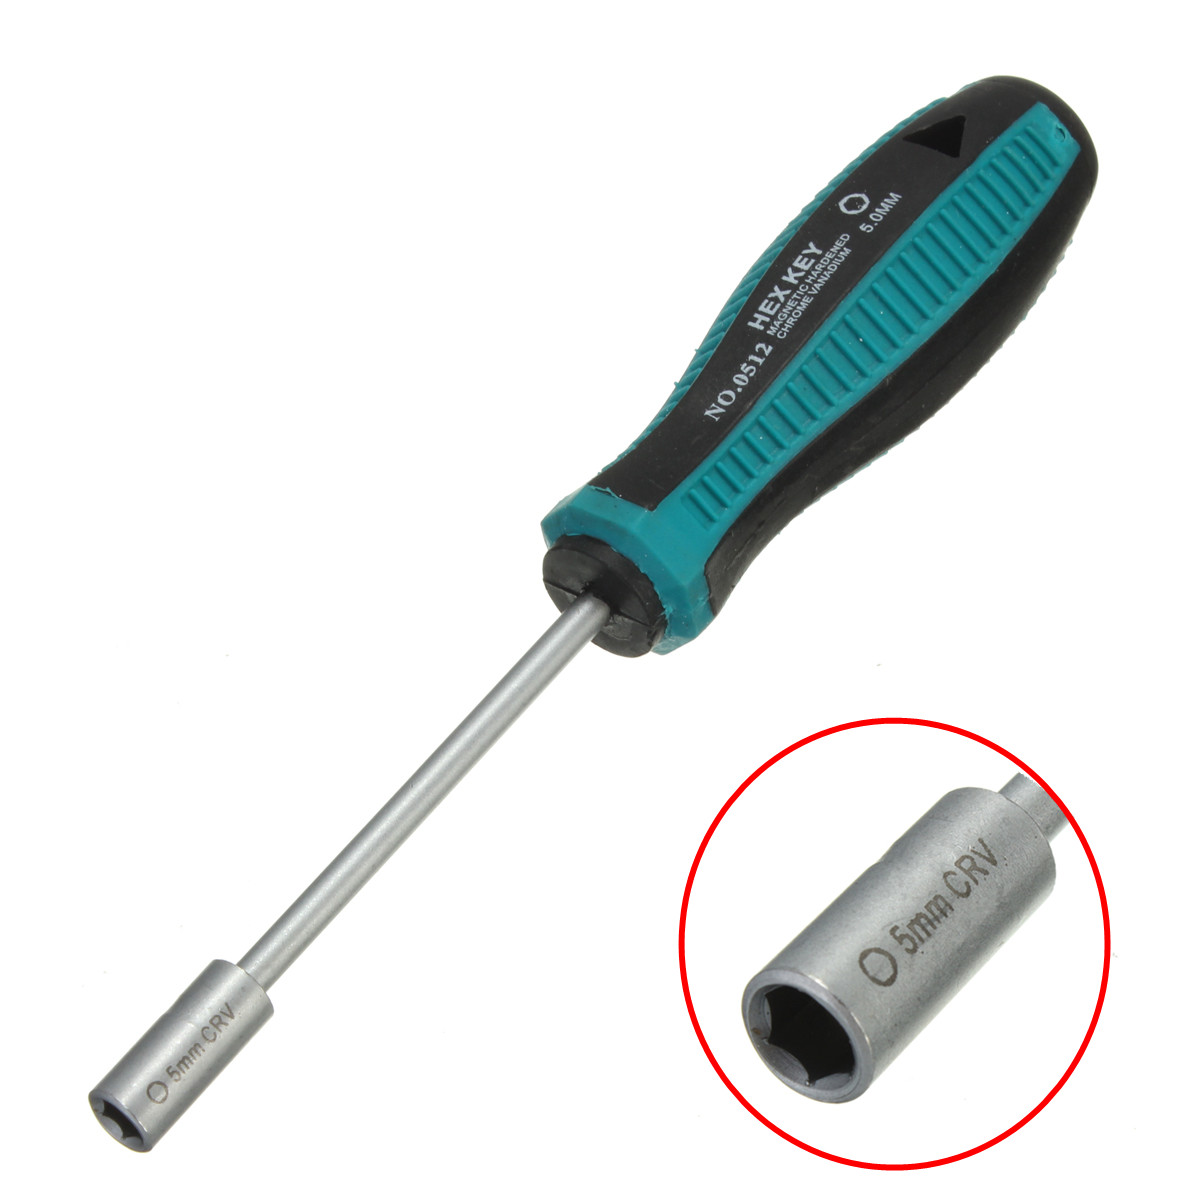 what is the use of screwdriver